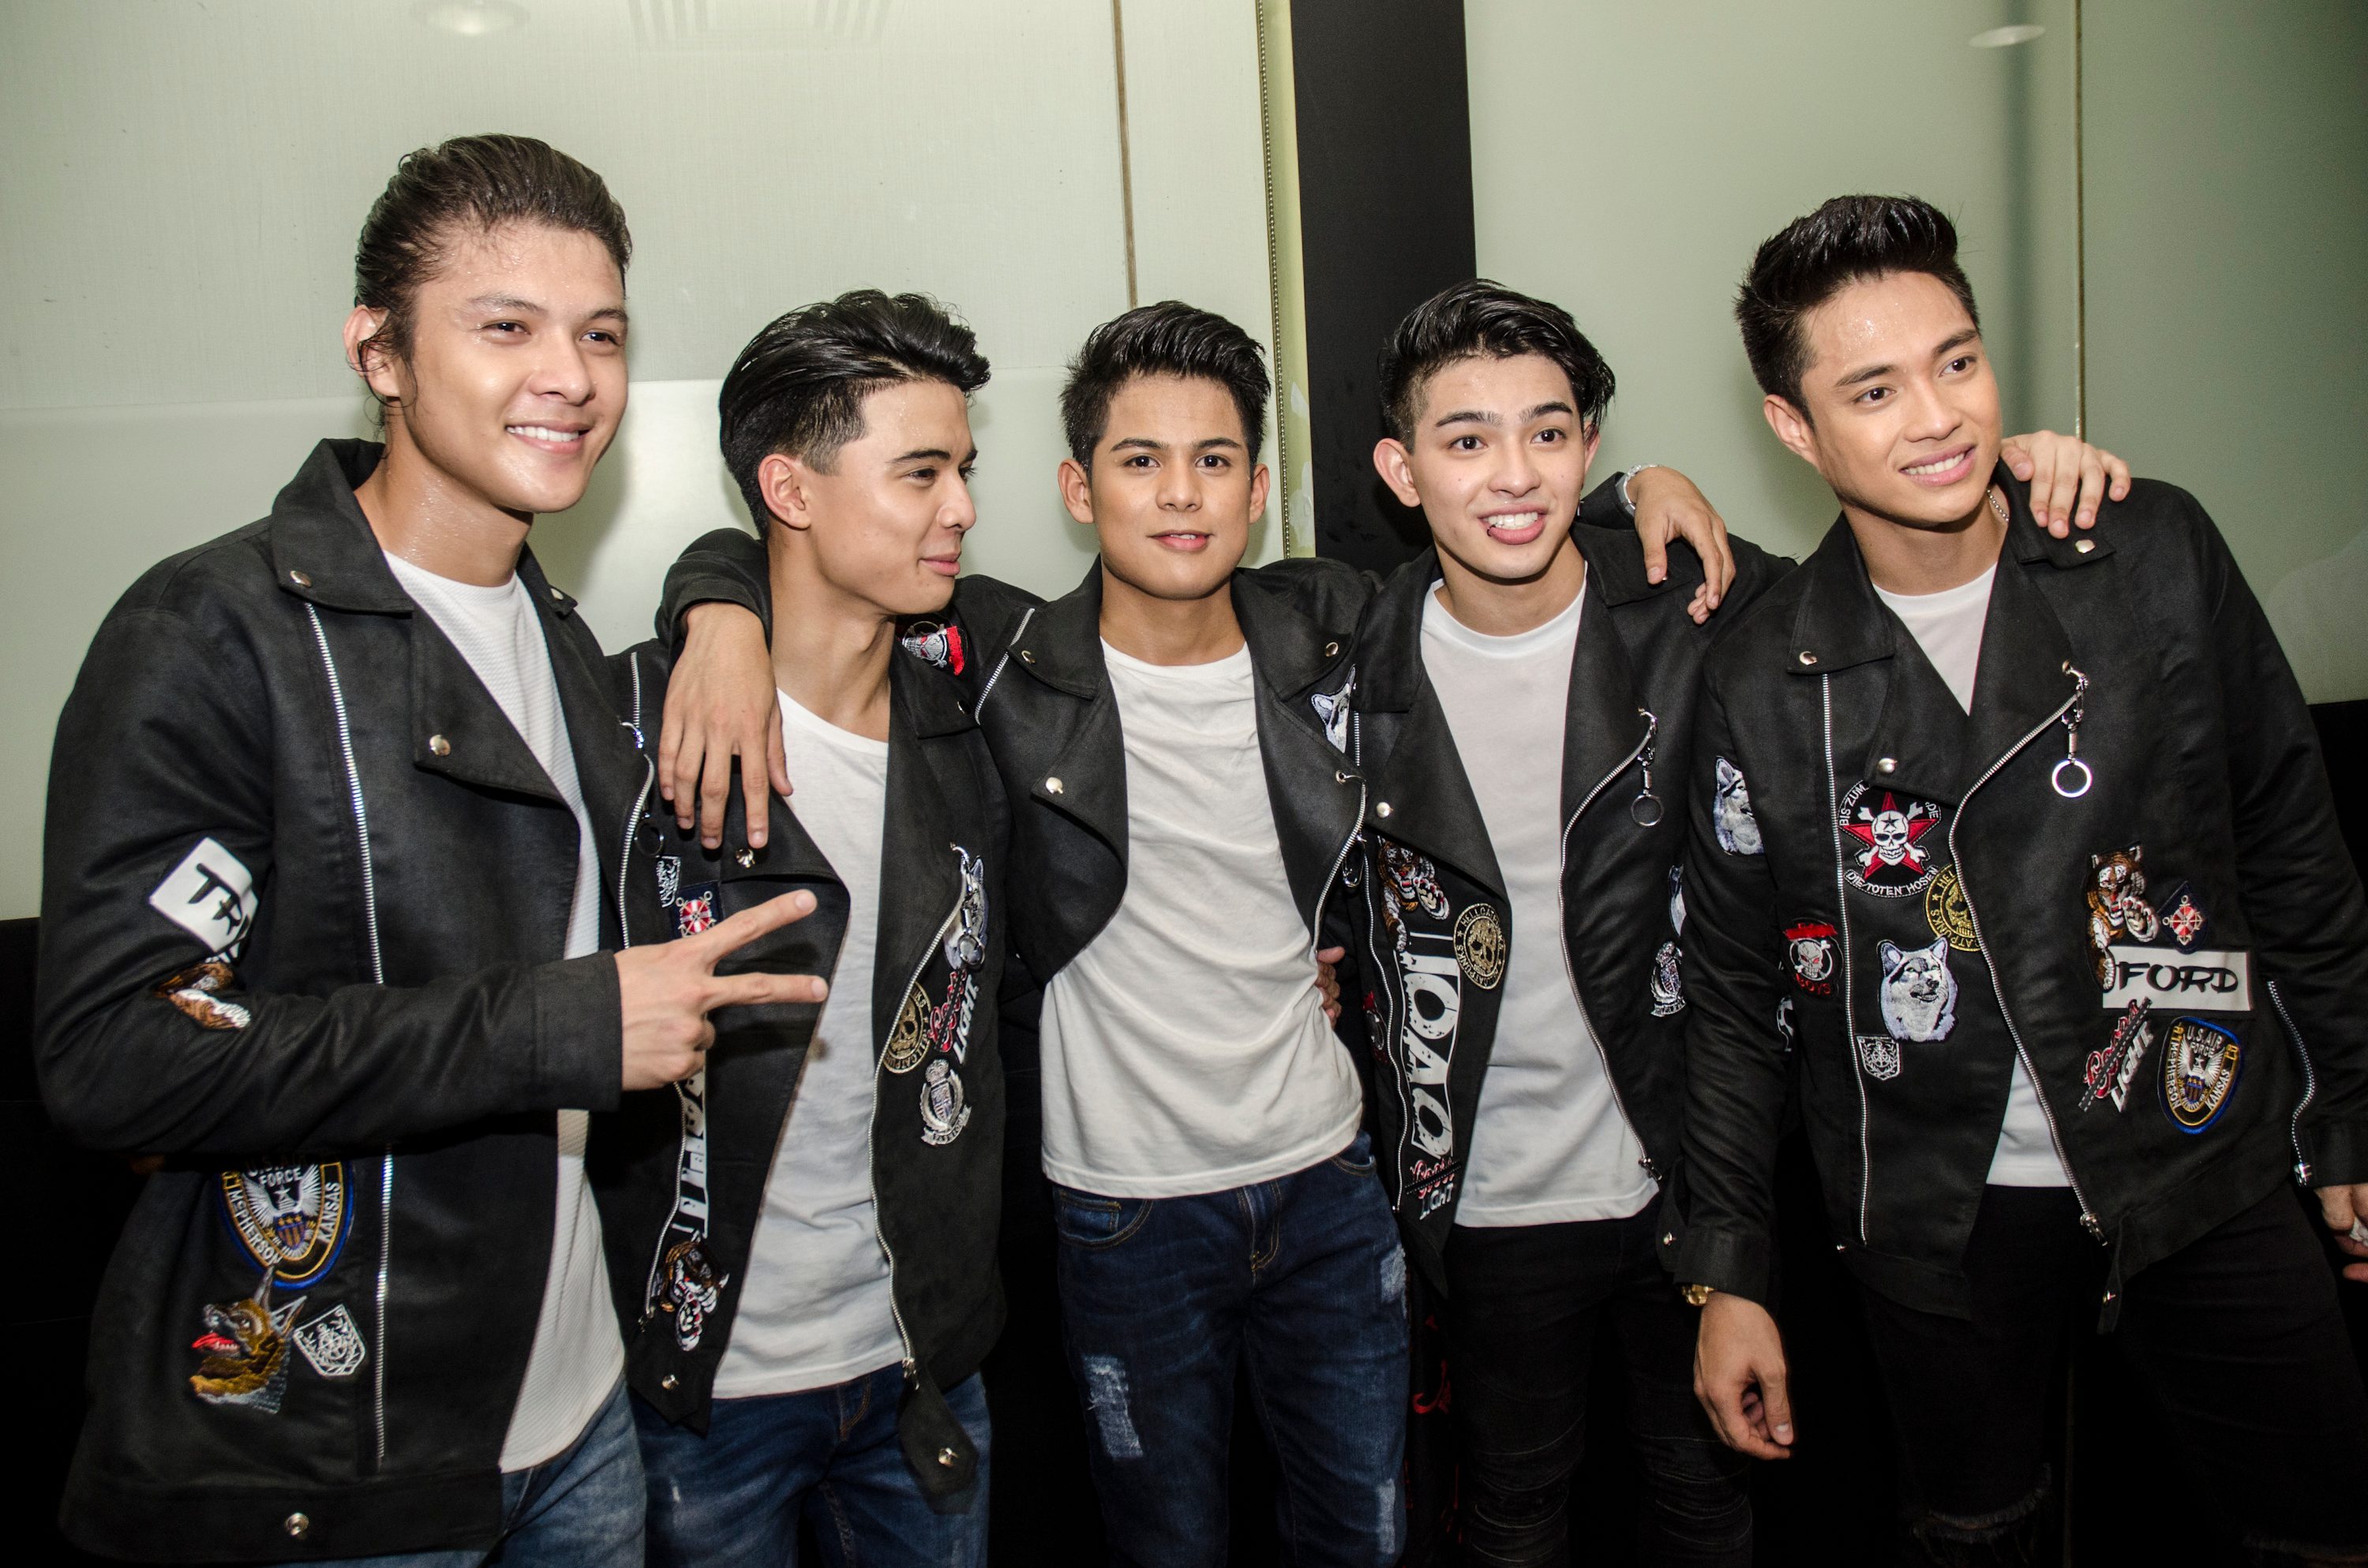 Niel Murillo (middle) with the rest of his groupmates. Photo by Rob Reyes/Rappler 